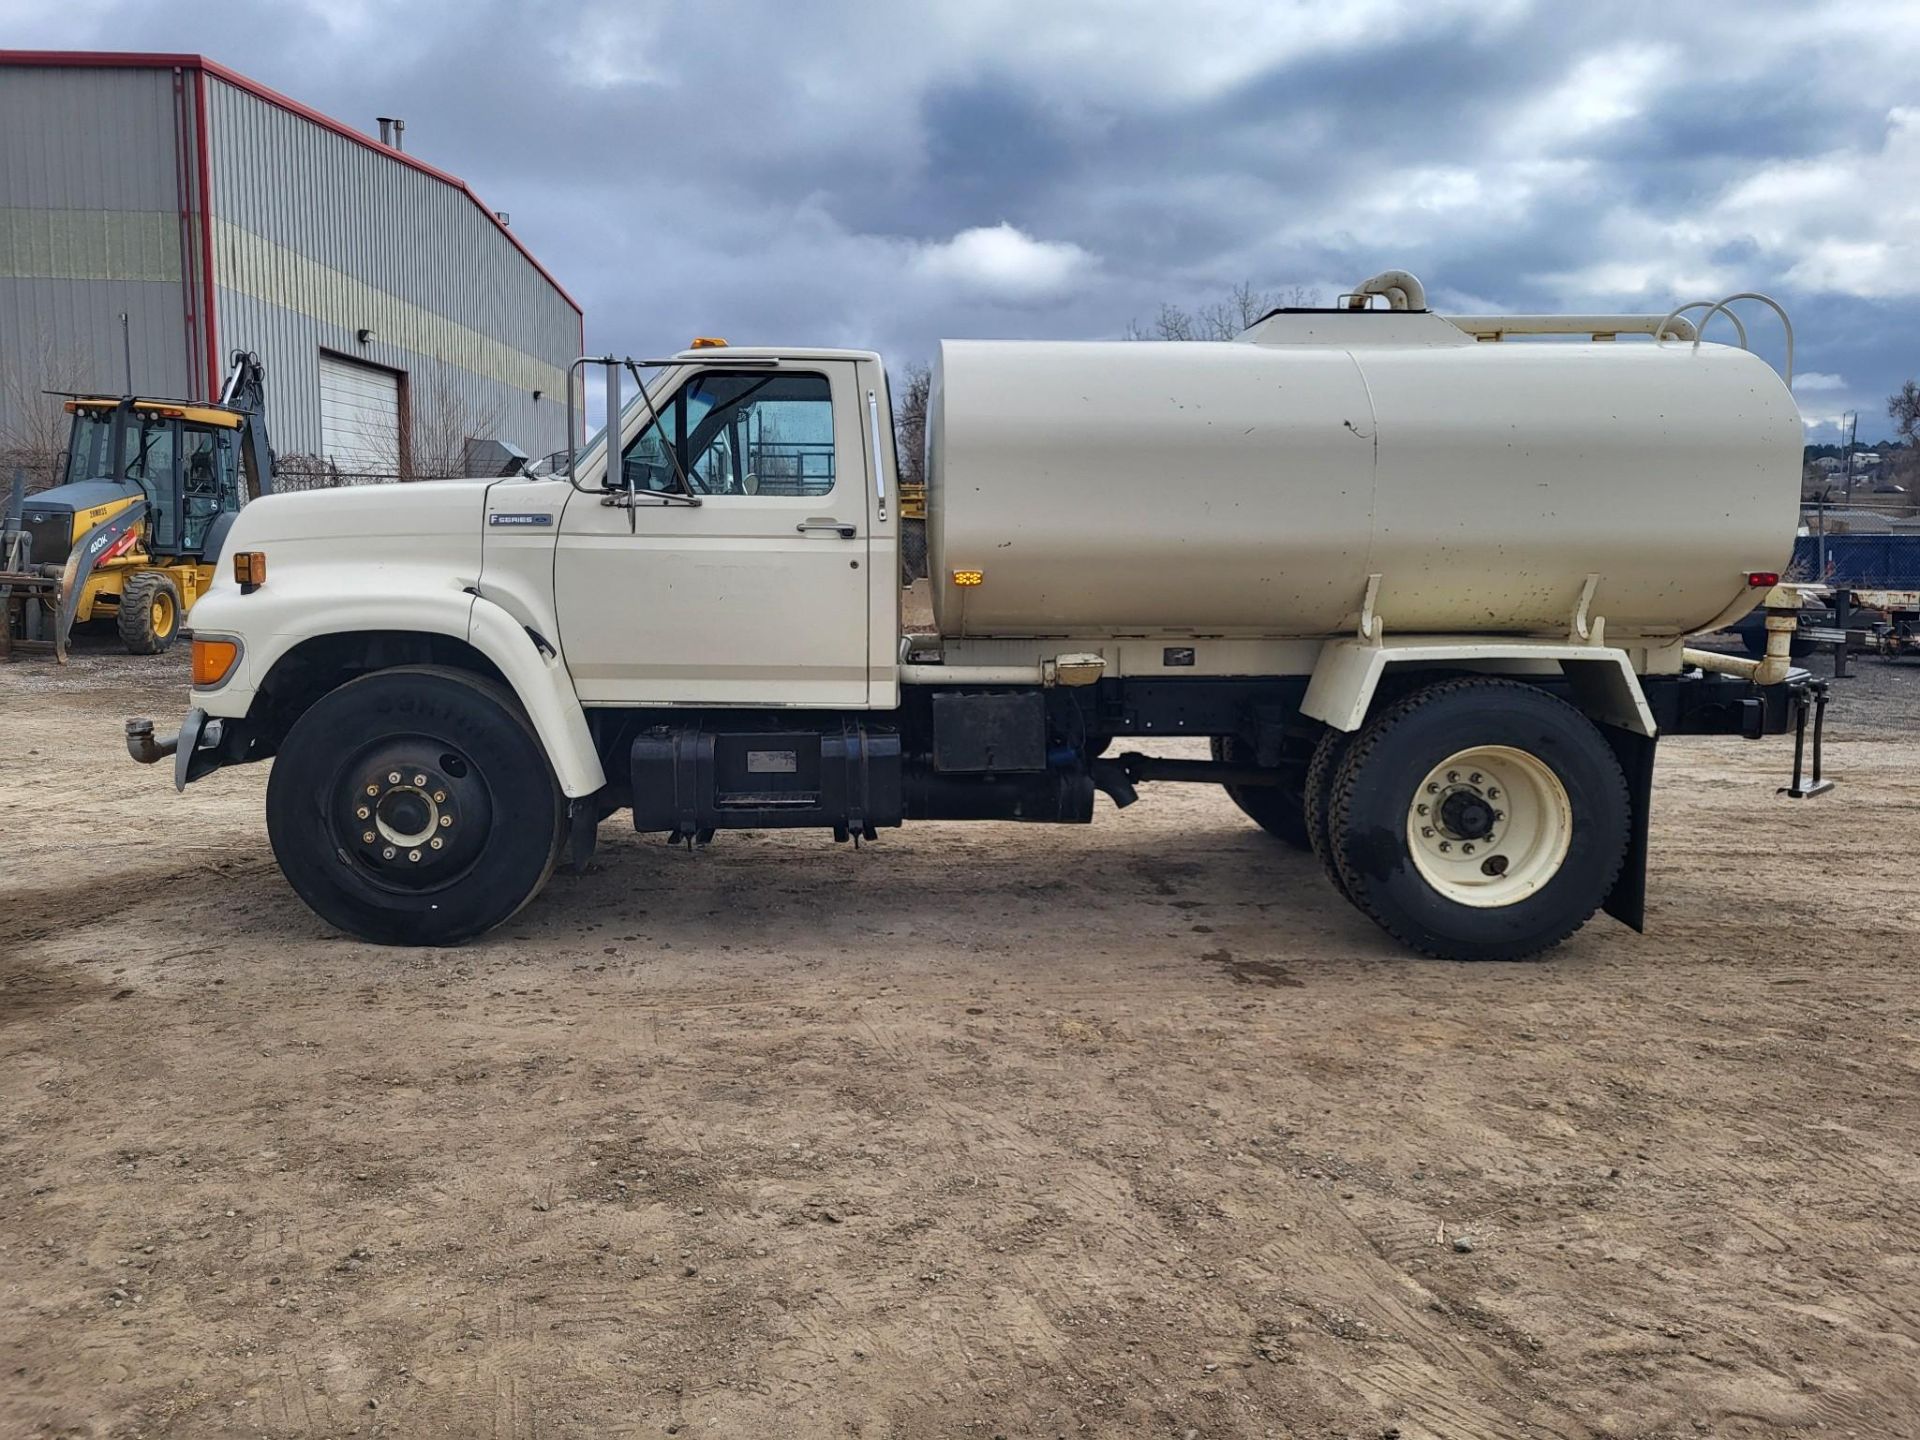 1995 FORD F800 WATER TRUCK - Image 8 of 20